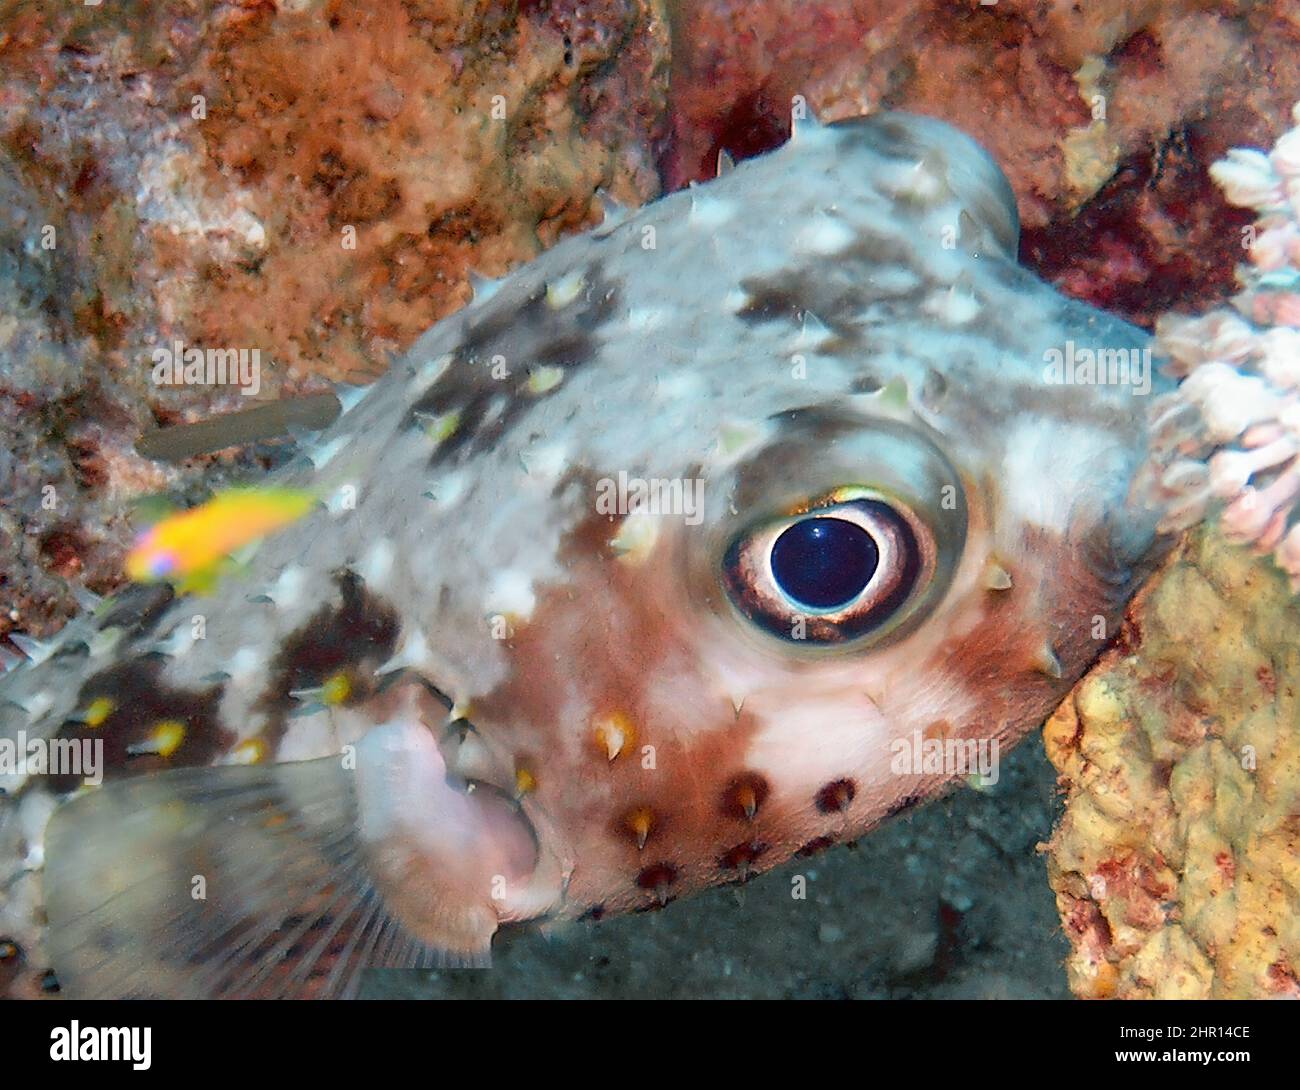 A Yellow-spotted Burrfish (Cyclichthys spilostylus) in the Red Sea Stock Photo